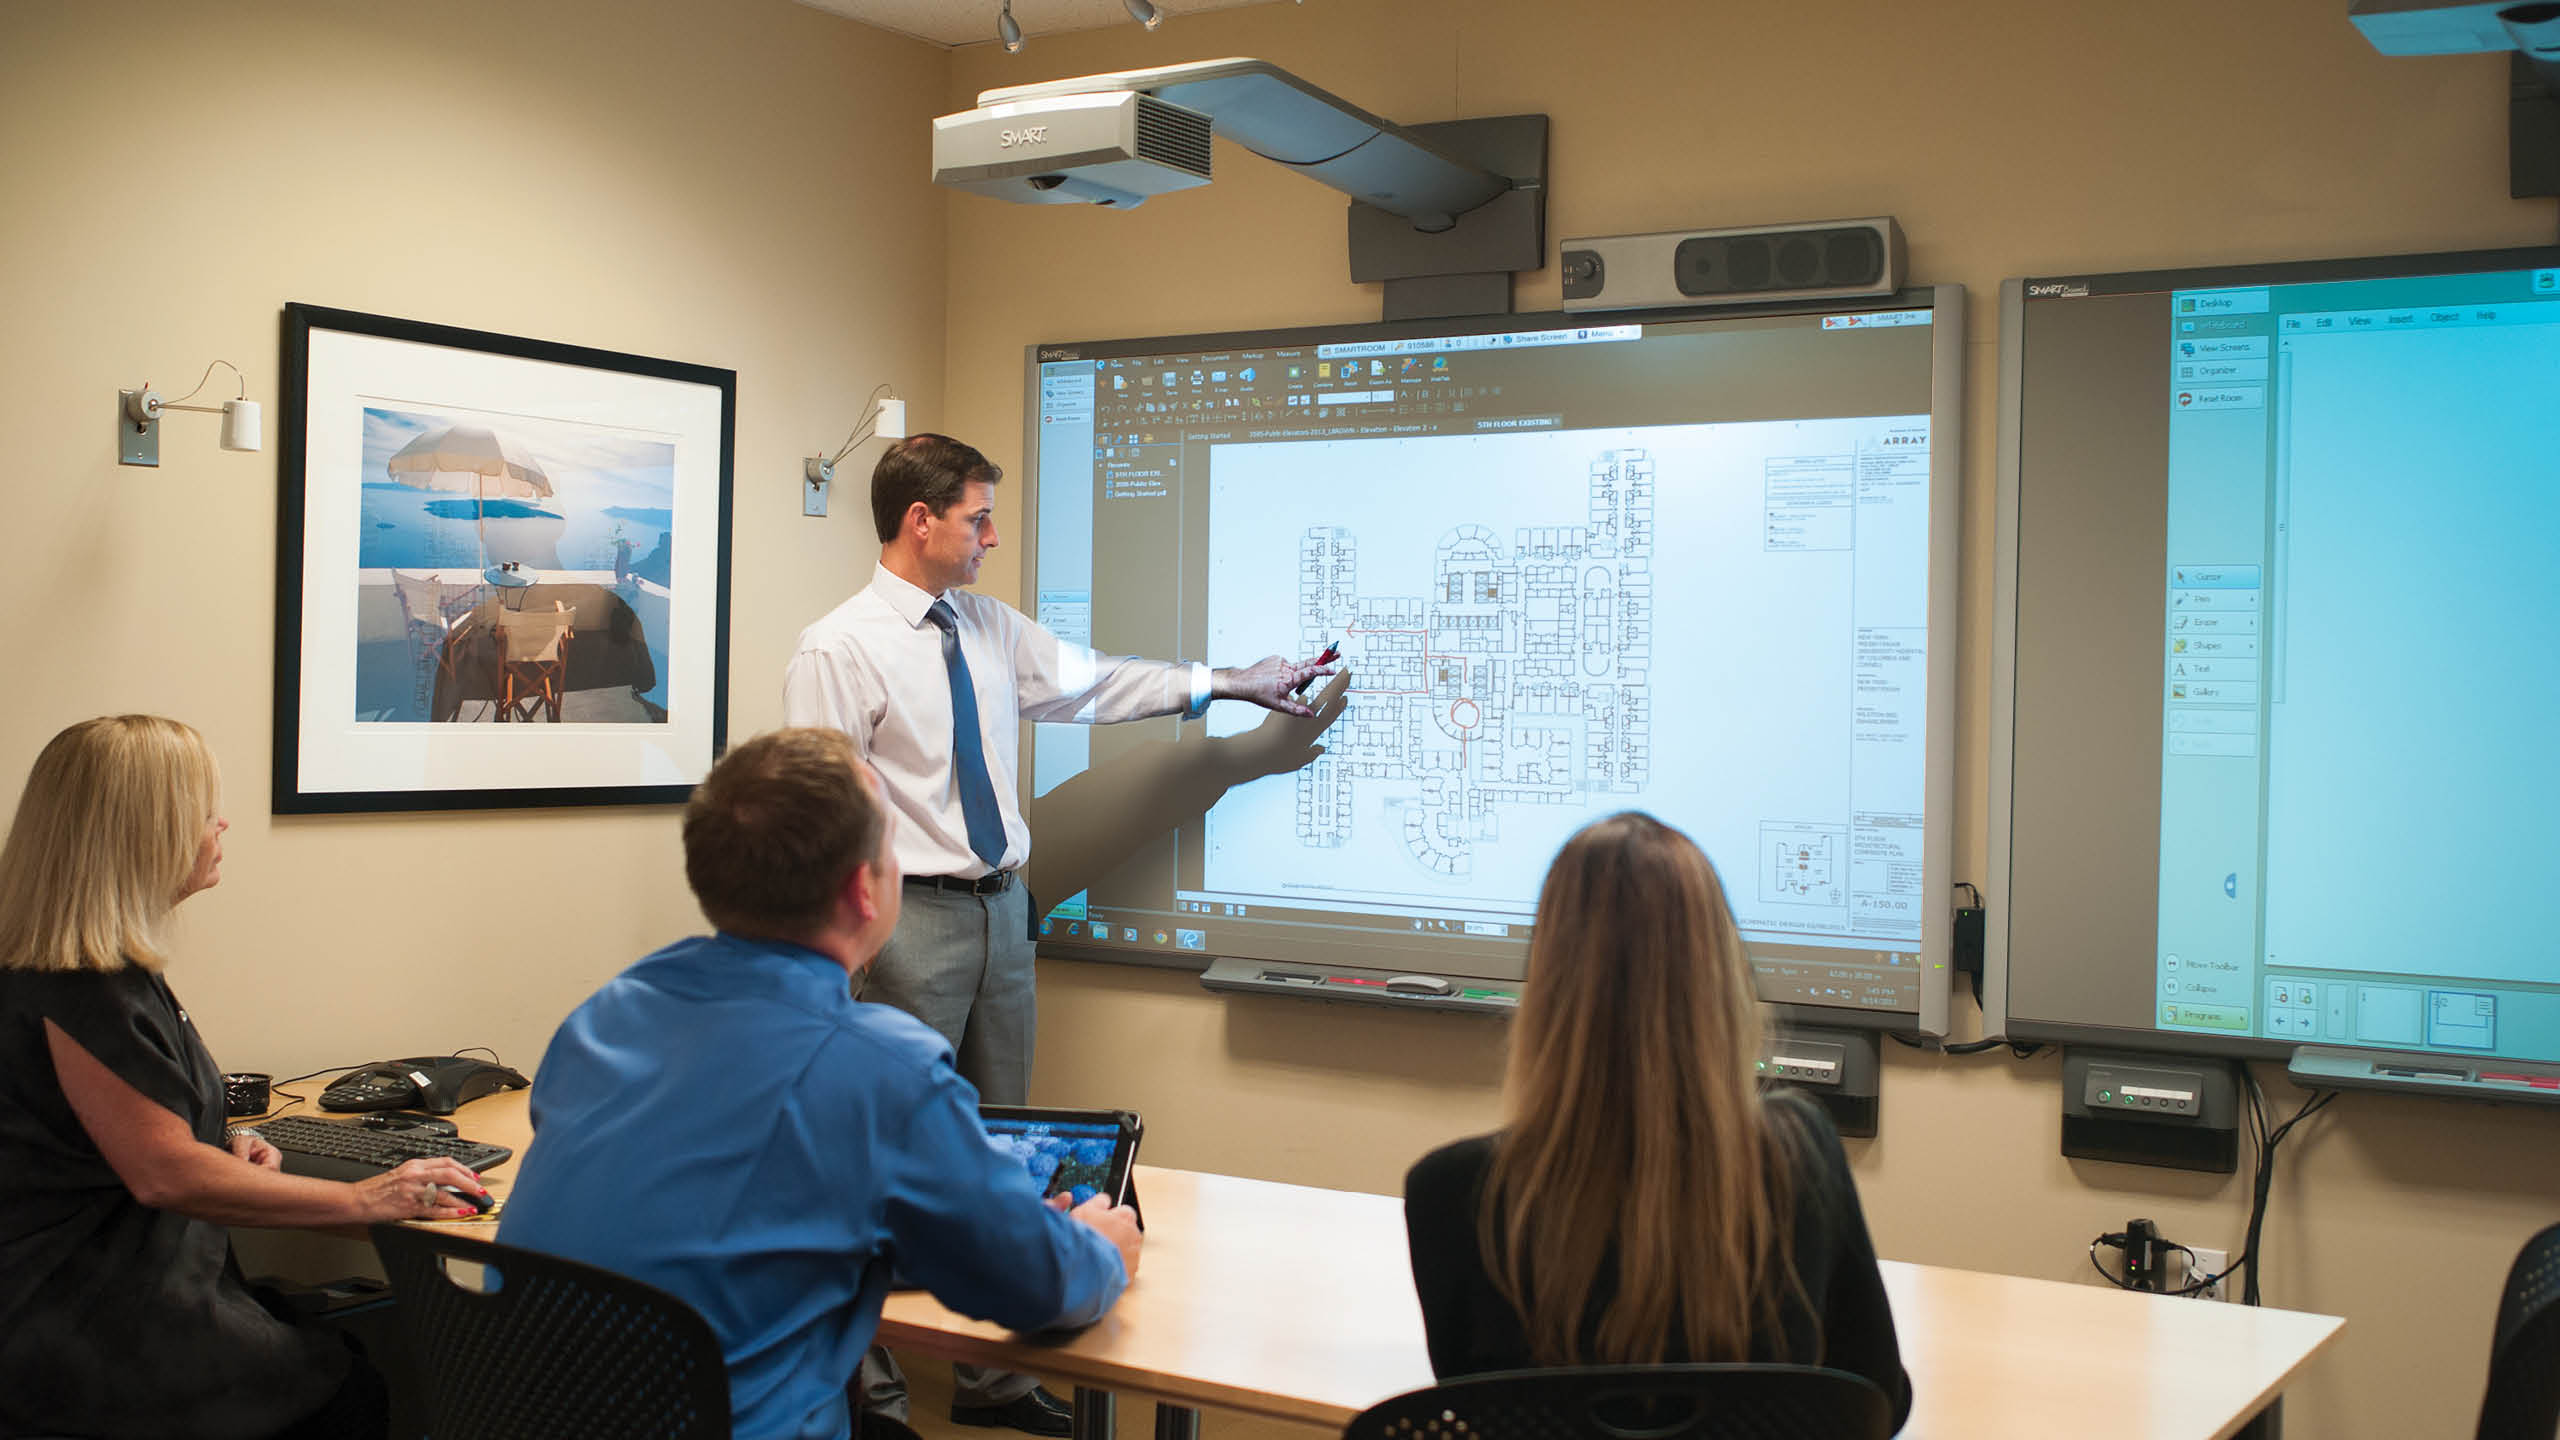 Building Information Modeling being presented on projection screen